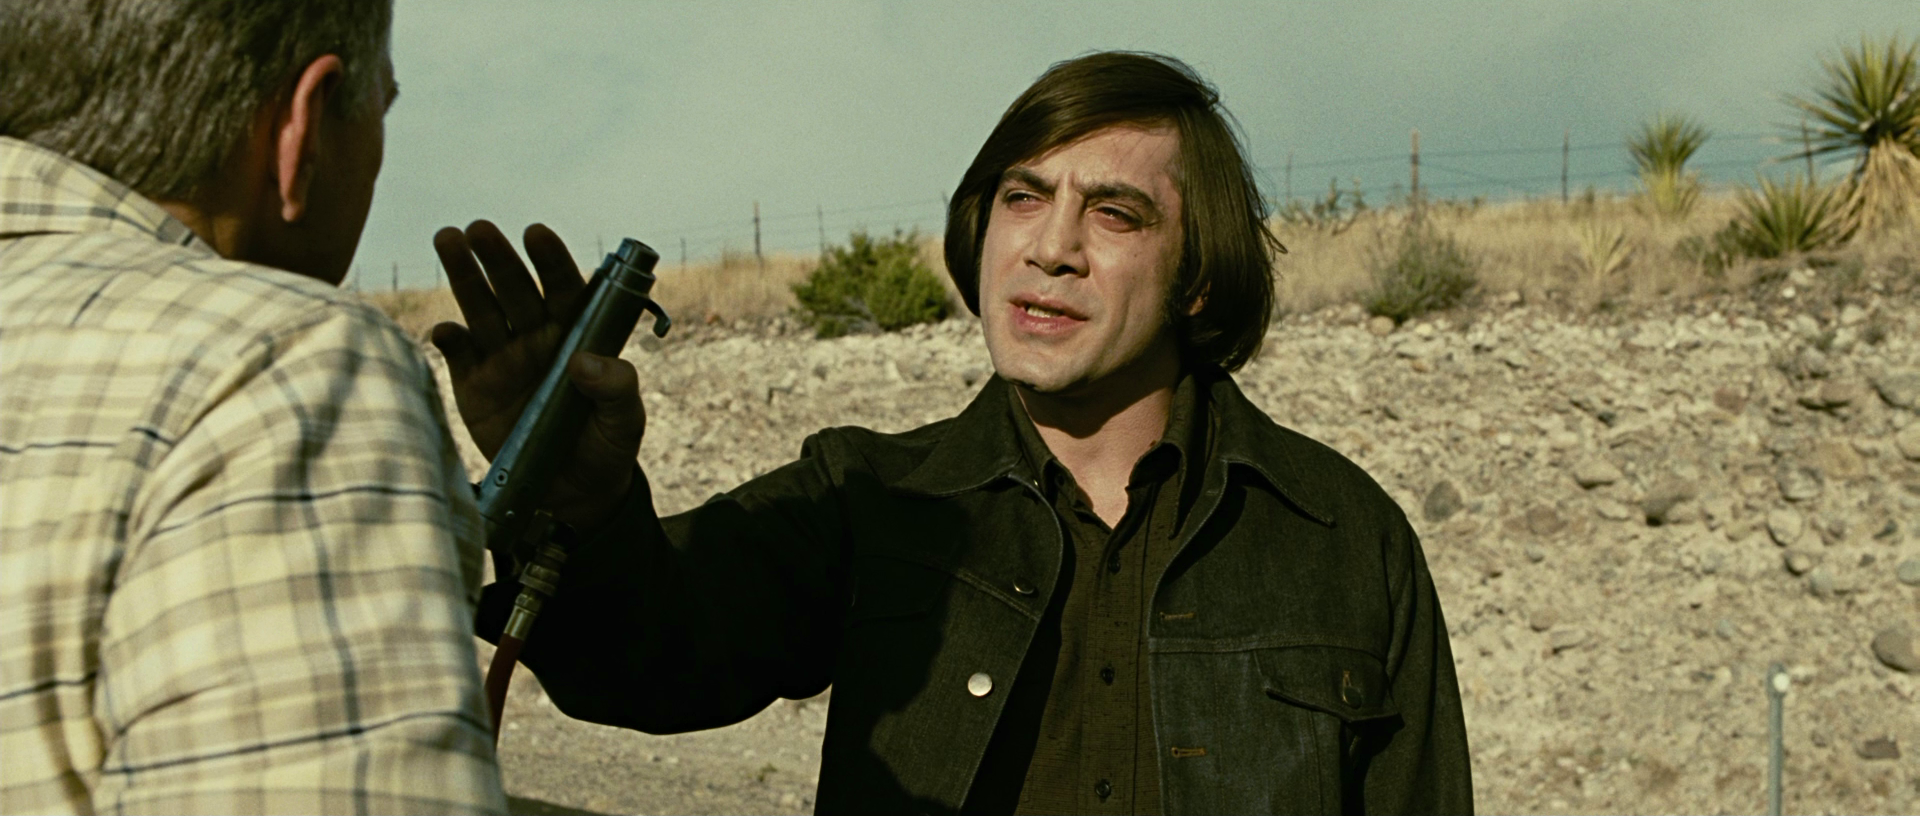 No country for old men film essay